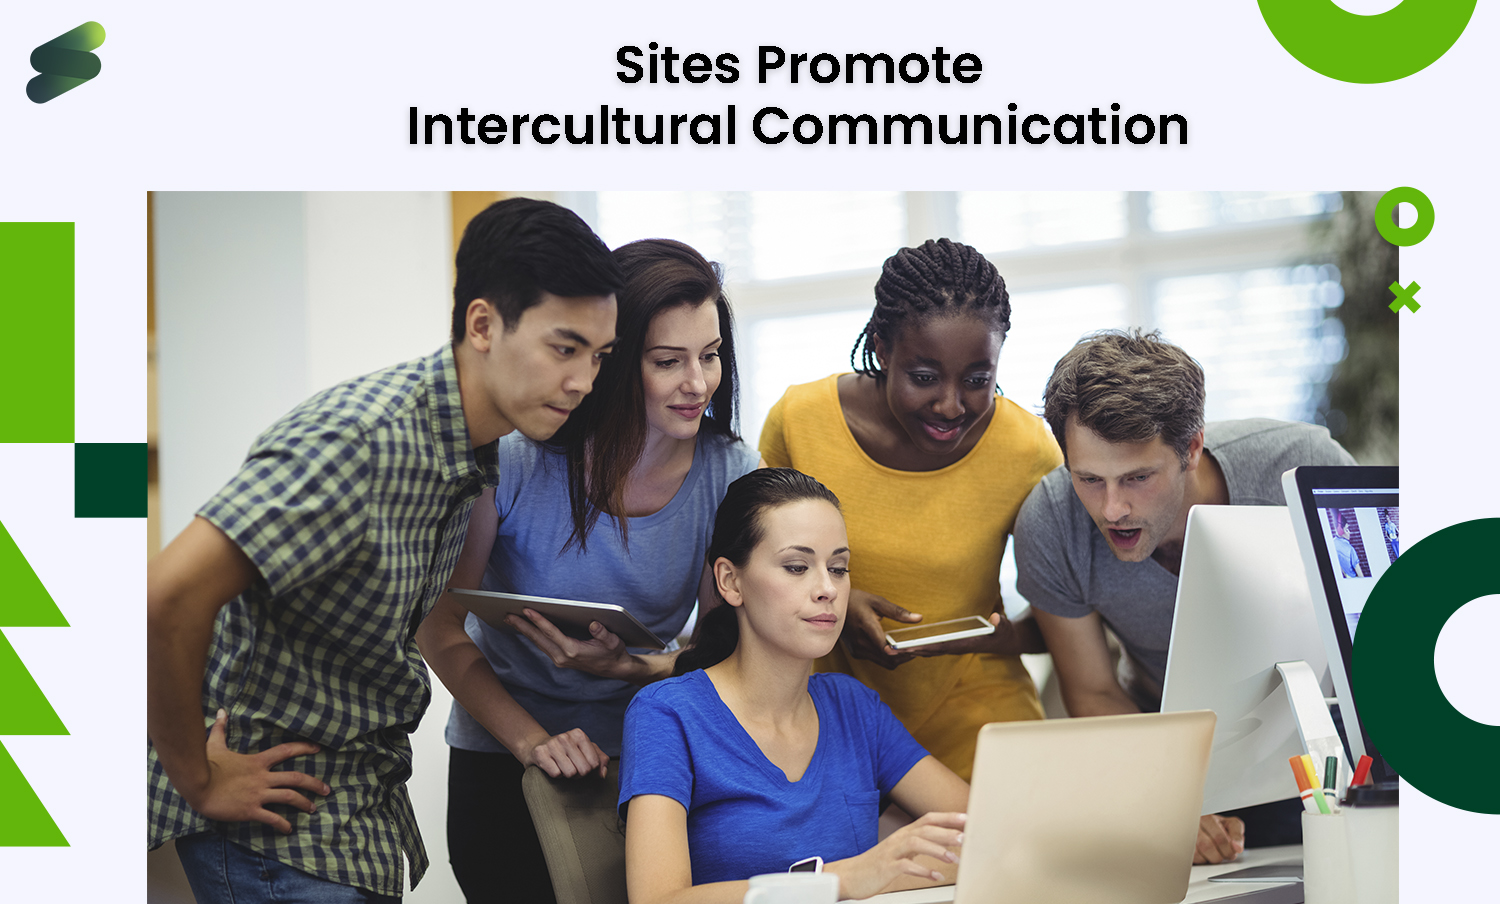 How Social Networking Sites Promote Intercultural Communication